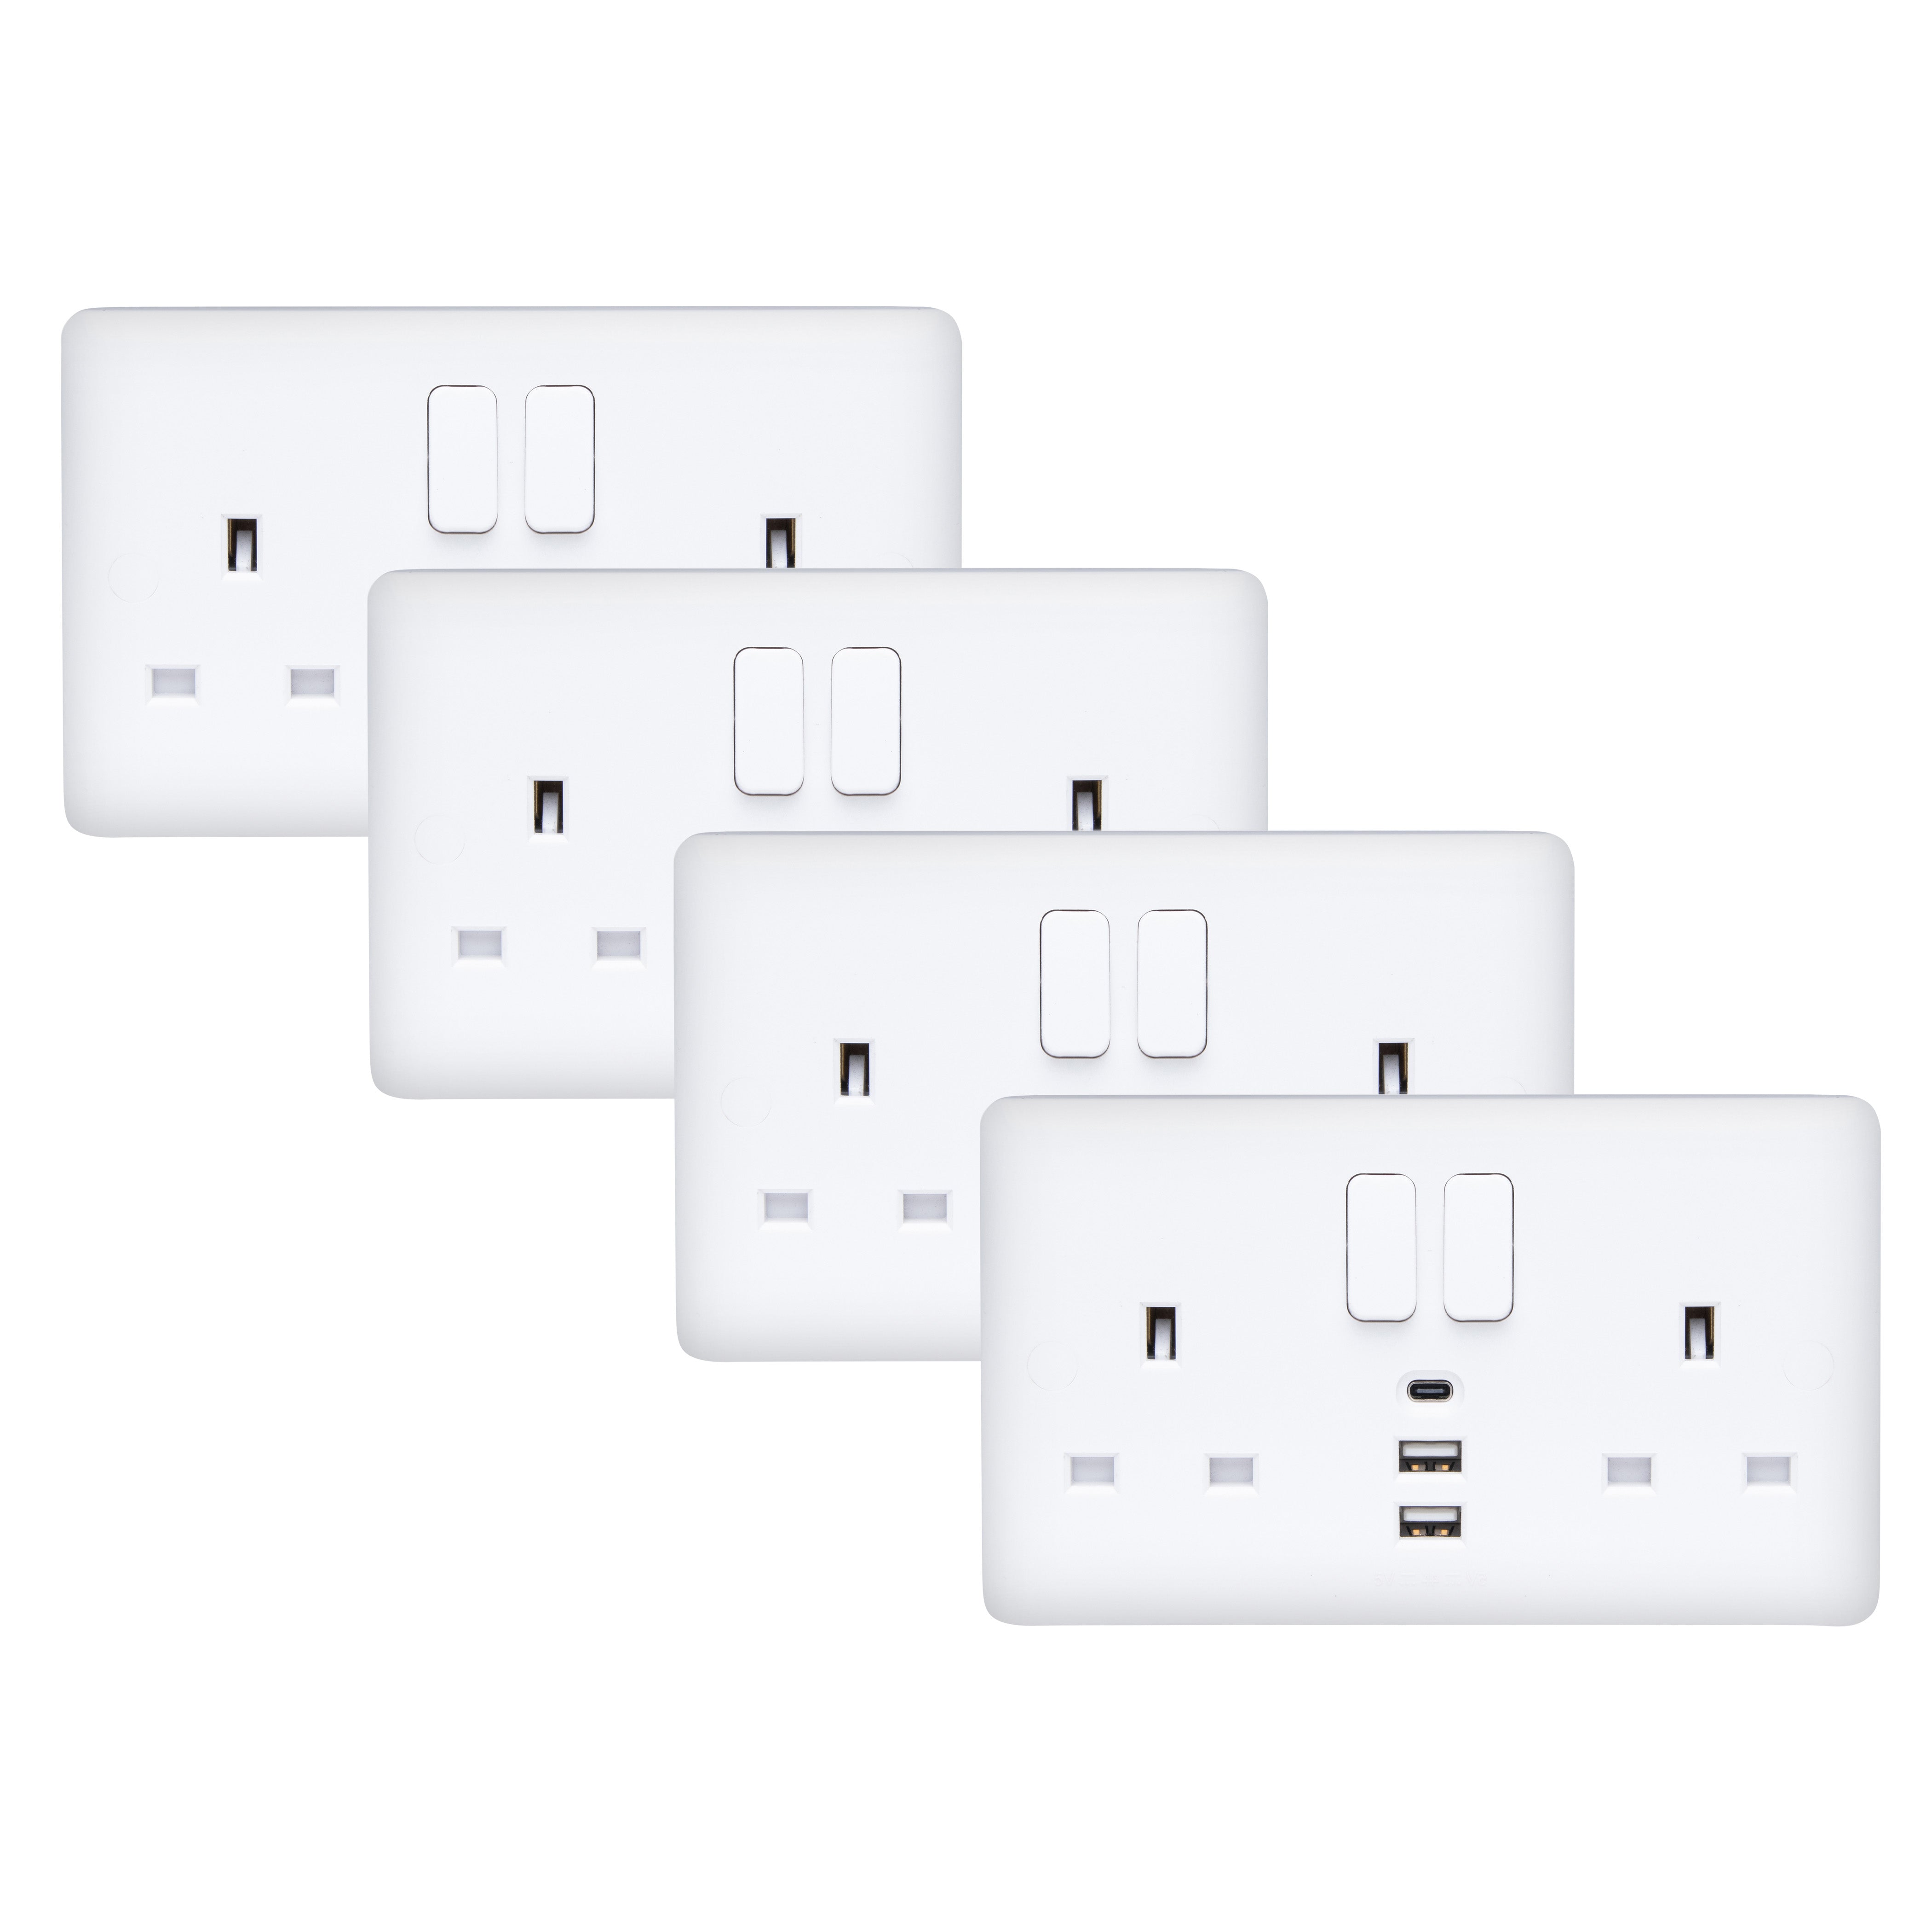 Deta 13A 2 Gang Switched Socket with 2x USB-A / 1x USB-C Ports (Pack of 4)